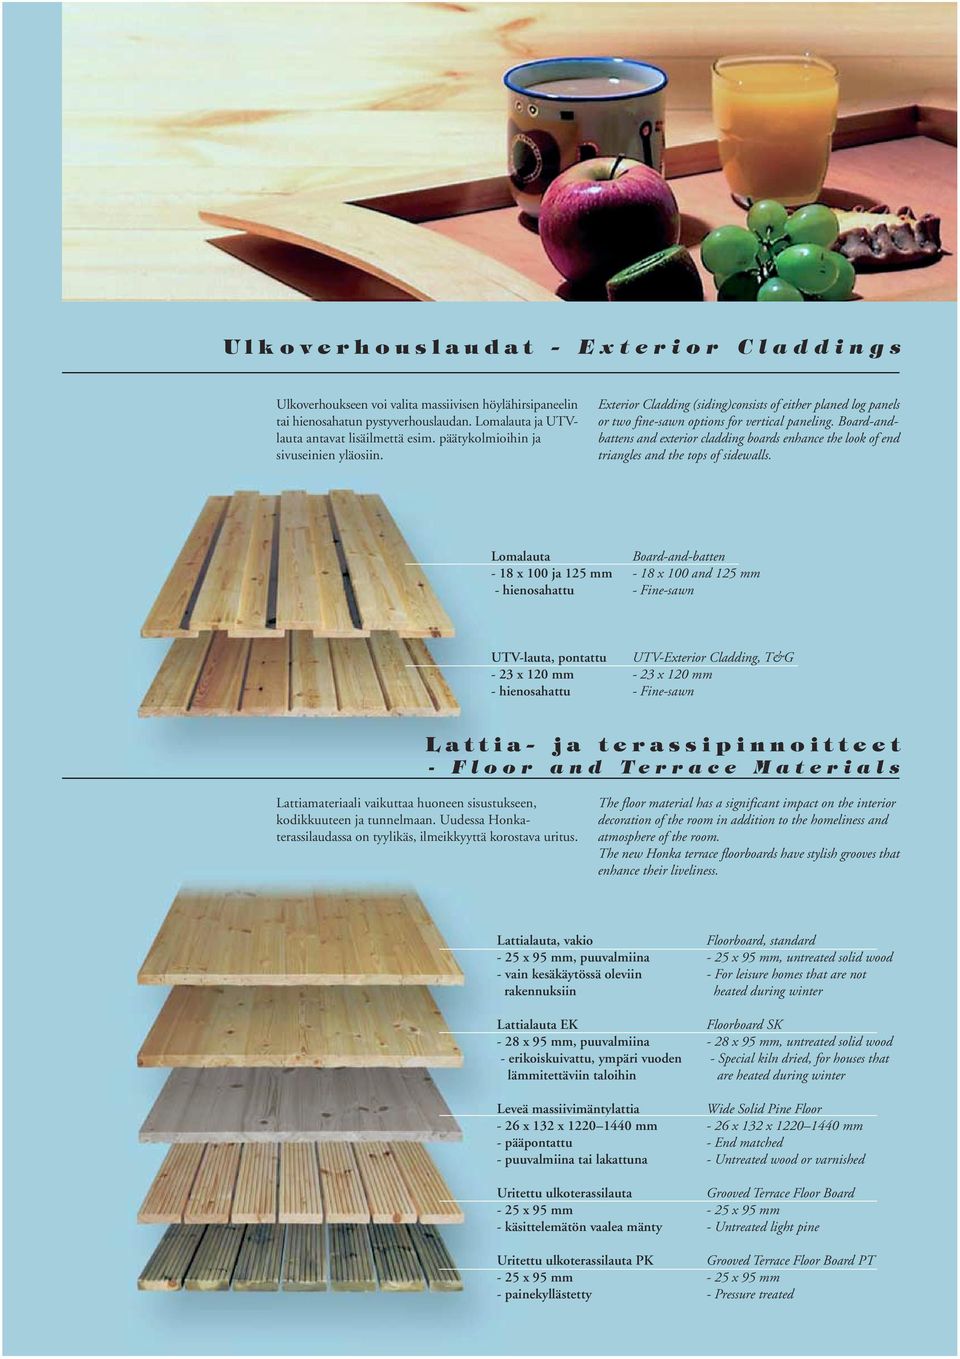 Board-andbattens and exterior cladding boards enhance the look of end triangles and the tops of sidewalls.